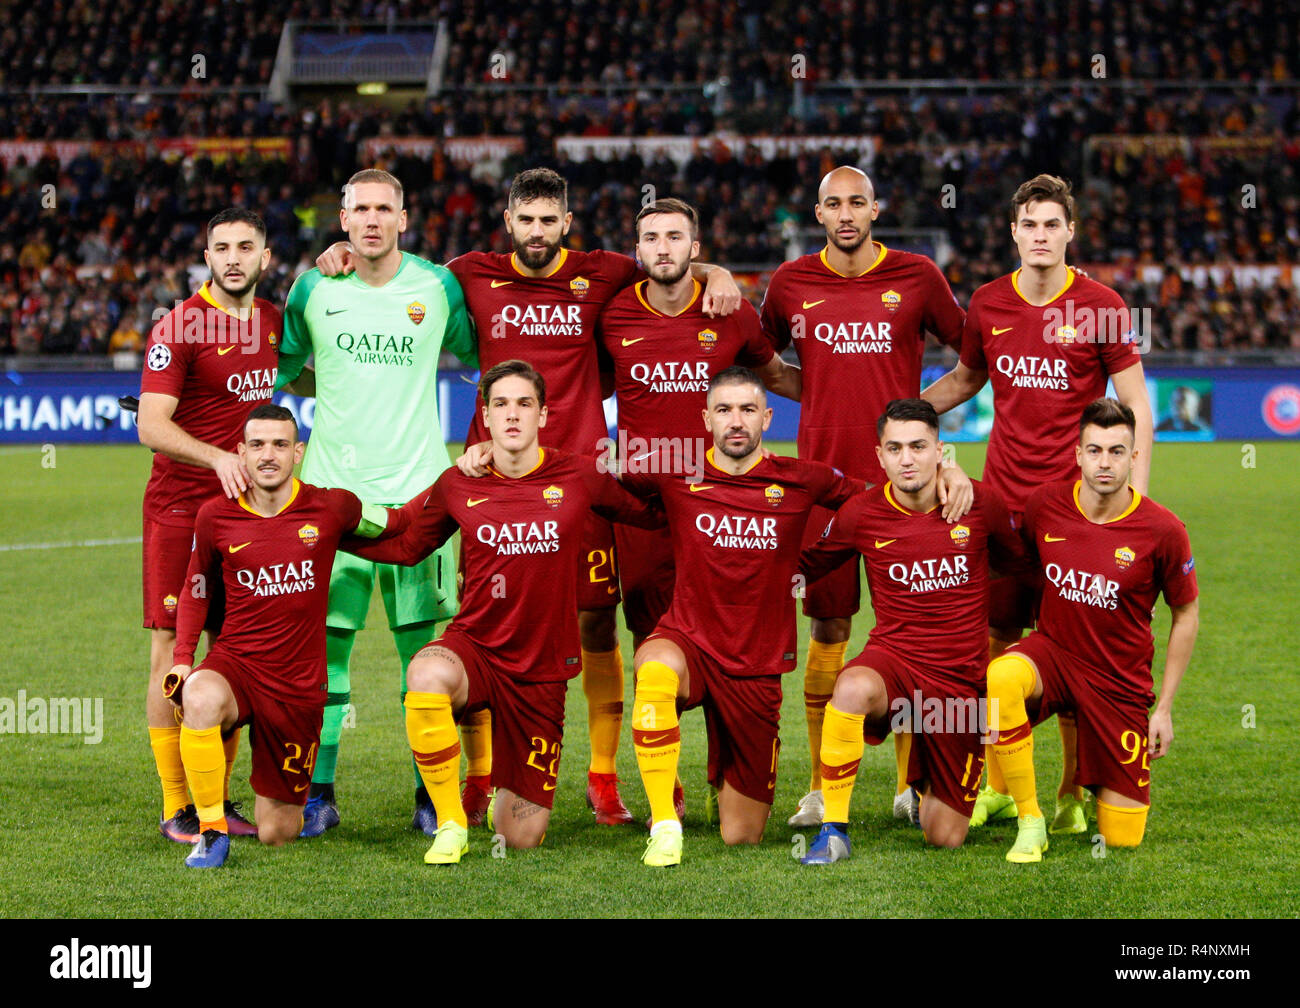 Rome, Italy, 27th November, 2018. Roma's players, front row, from left, Alessandro Florenzi , Nicolo' Zaniolo, Aleksandar Kolarov, Cengiz Under, Stephan El Shaarawy, back row, from left, Kostas Manolas, Robin Olsen, Federico Fazio, Bryan Cristante, Steven Nzonzi and Patrik Schick, pose prior to the start of the Champions League Group G soccer match between Roma and Real Madrid at the Olympic Stadium. Real Madrid won 2-0. © UPDATE IMAGES/ Alamy Live News Stock Photo